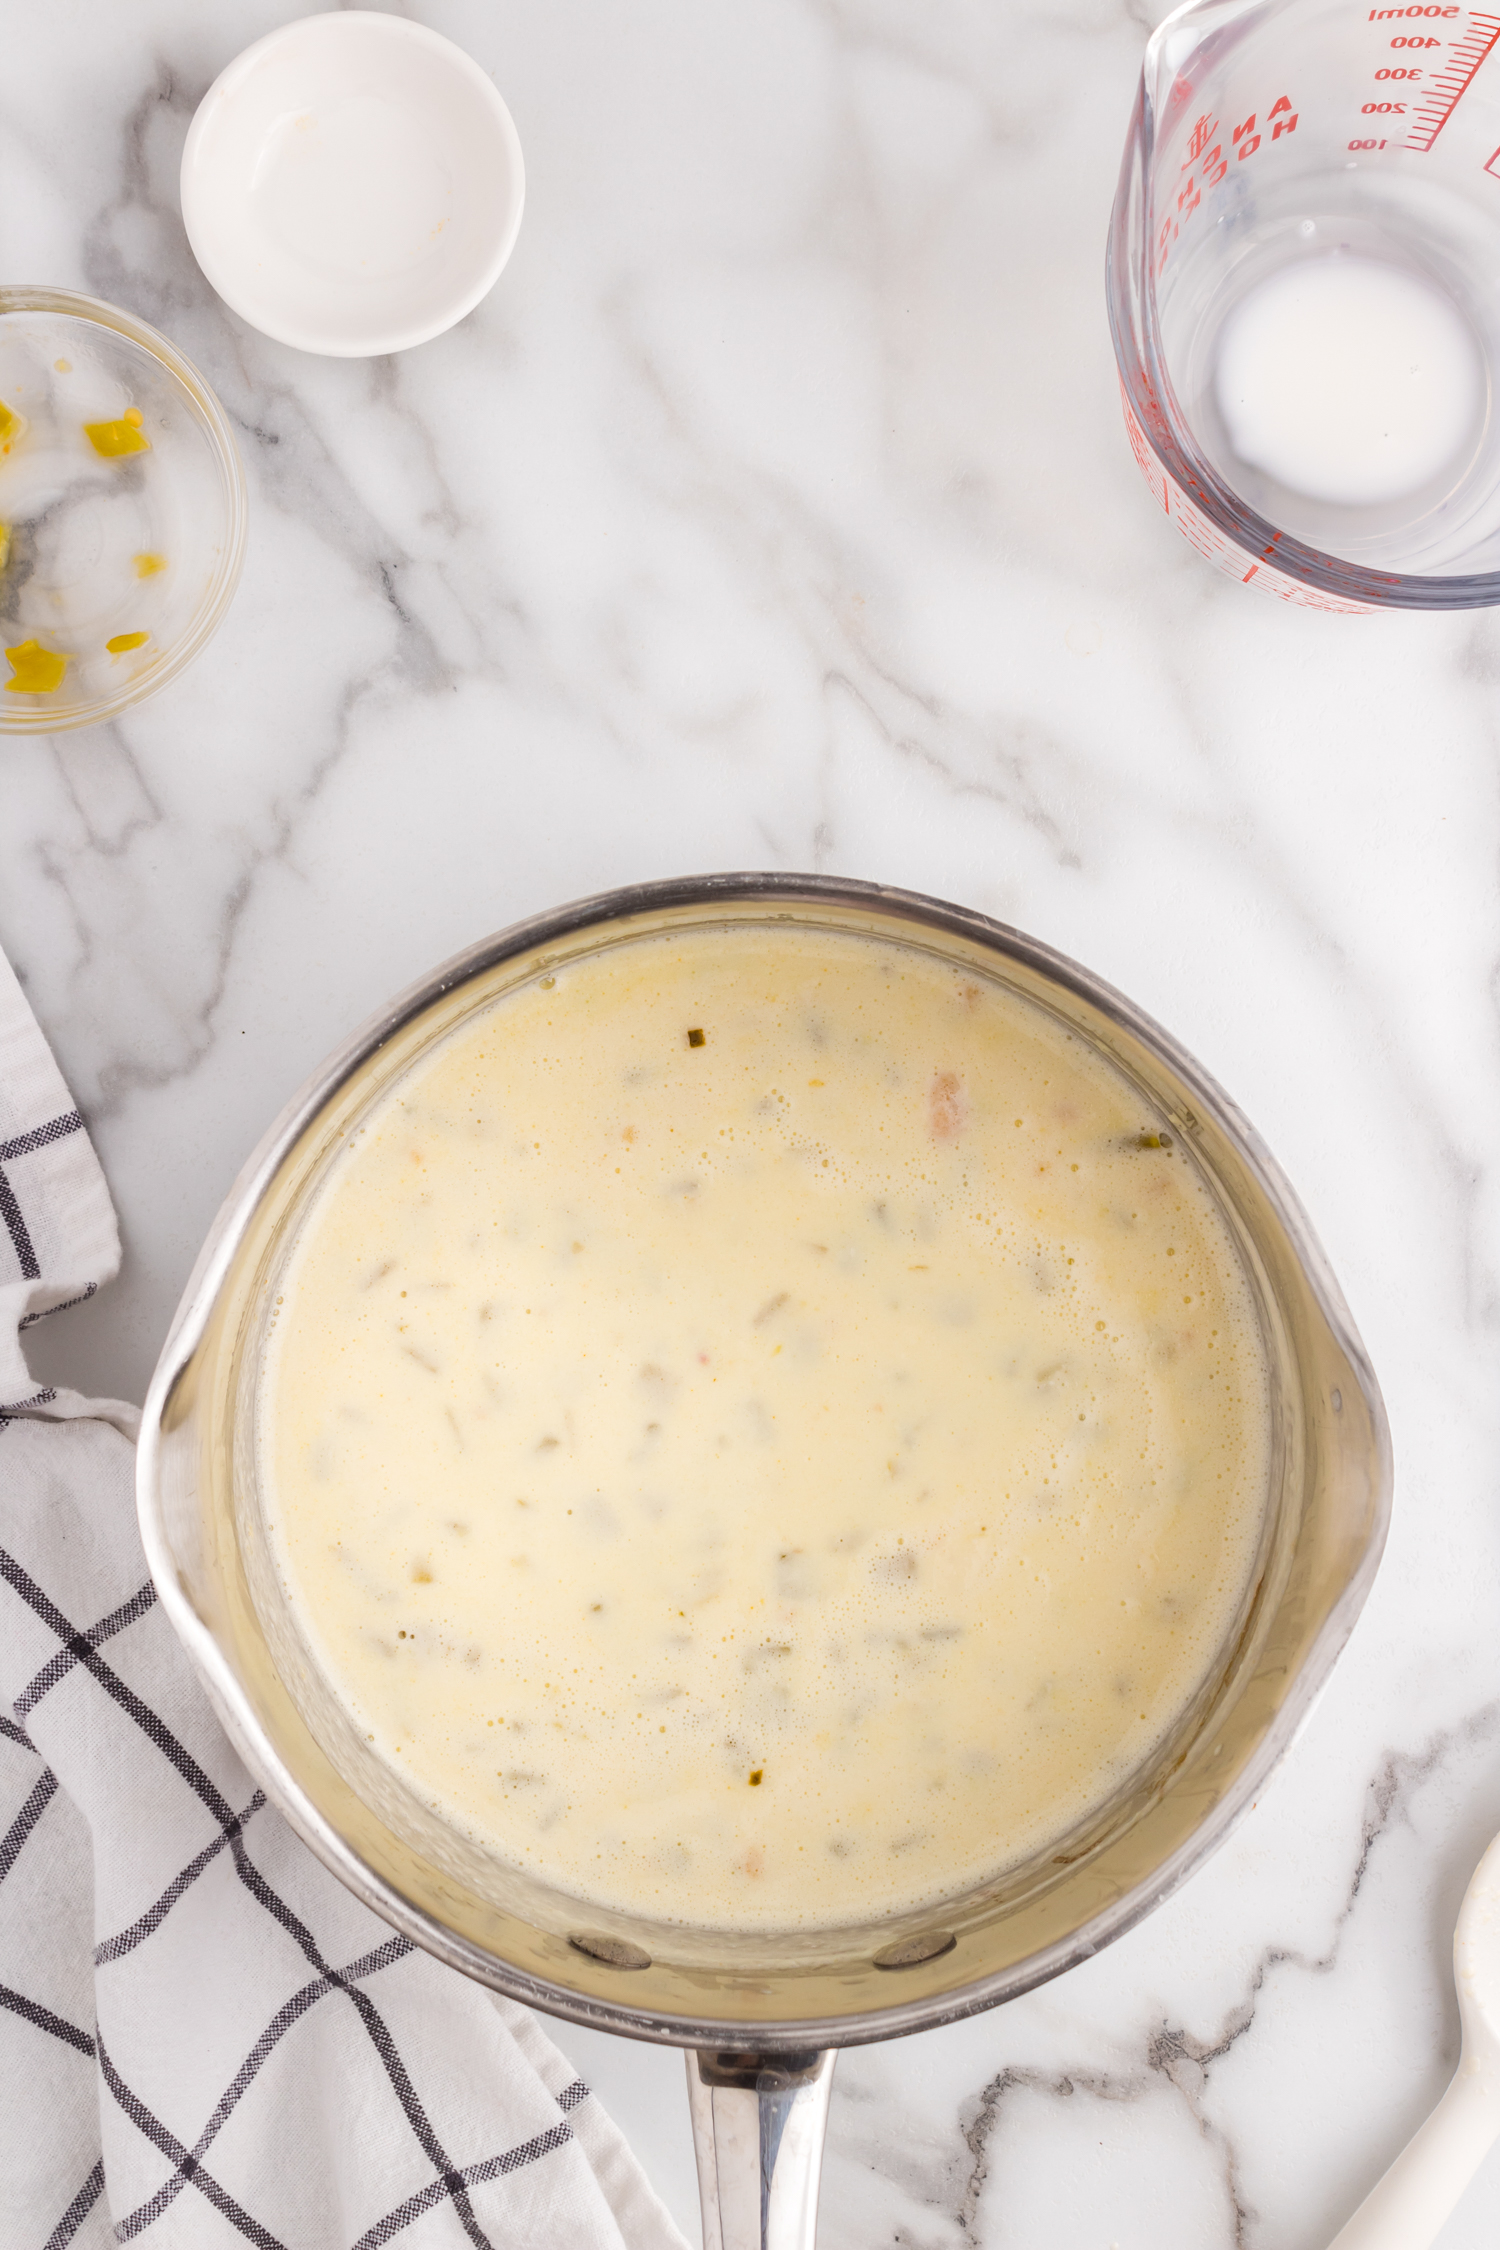 Perfectly blended cheeses and seasonings in saucepan for Queso Dip recipe